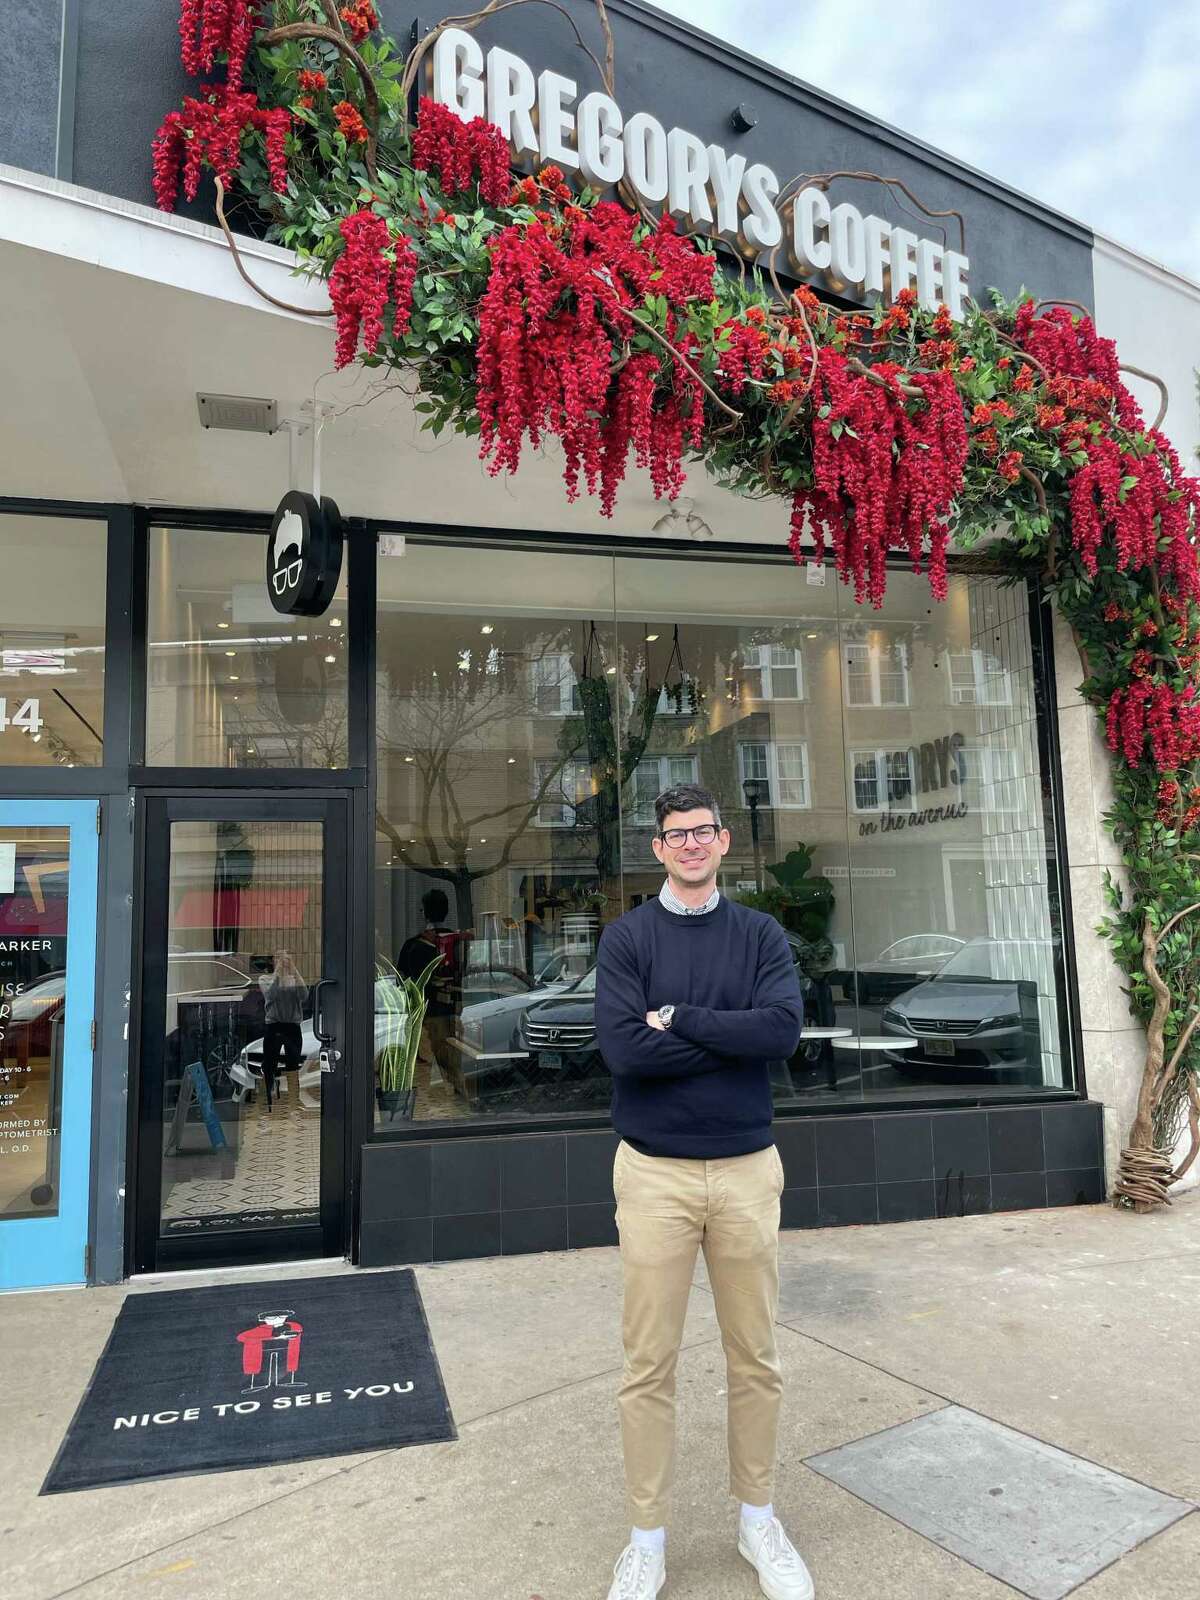 Gregory Zamfotis, founder and CEO of Gregorys, stands outside the new Gregorys Coffee shop at 342 Greenwich Ave., in Greenwich, Conn.